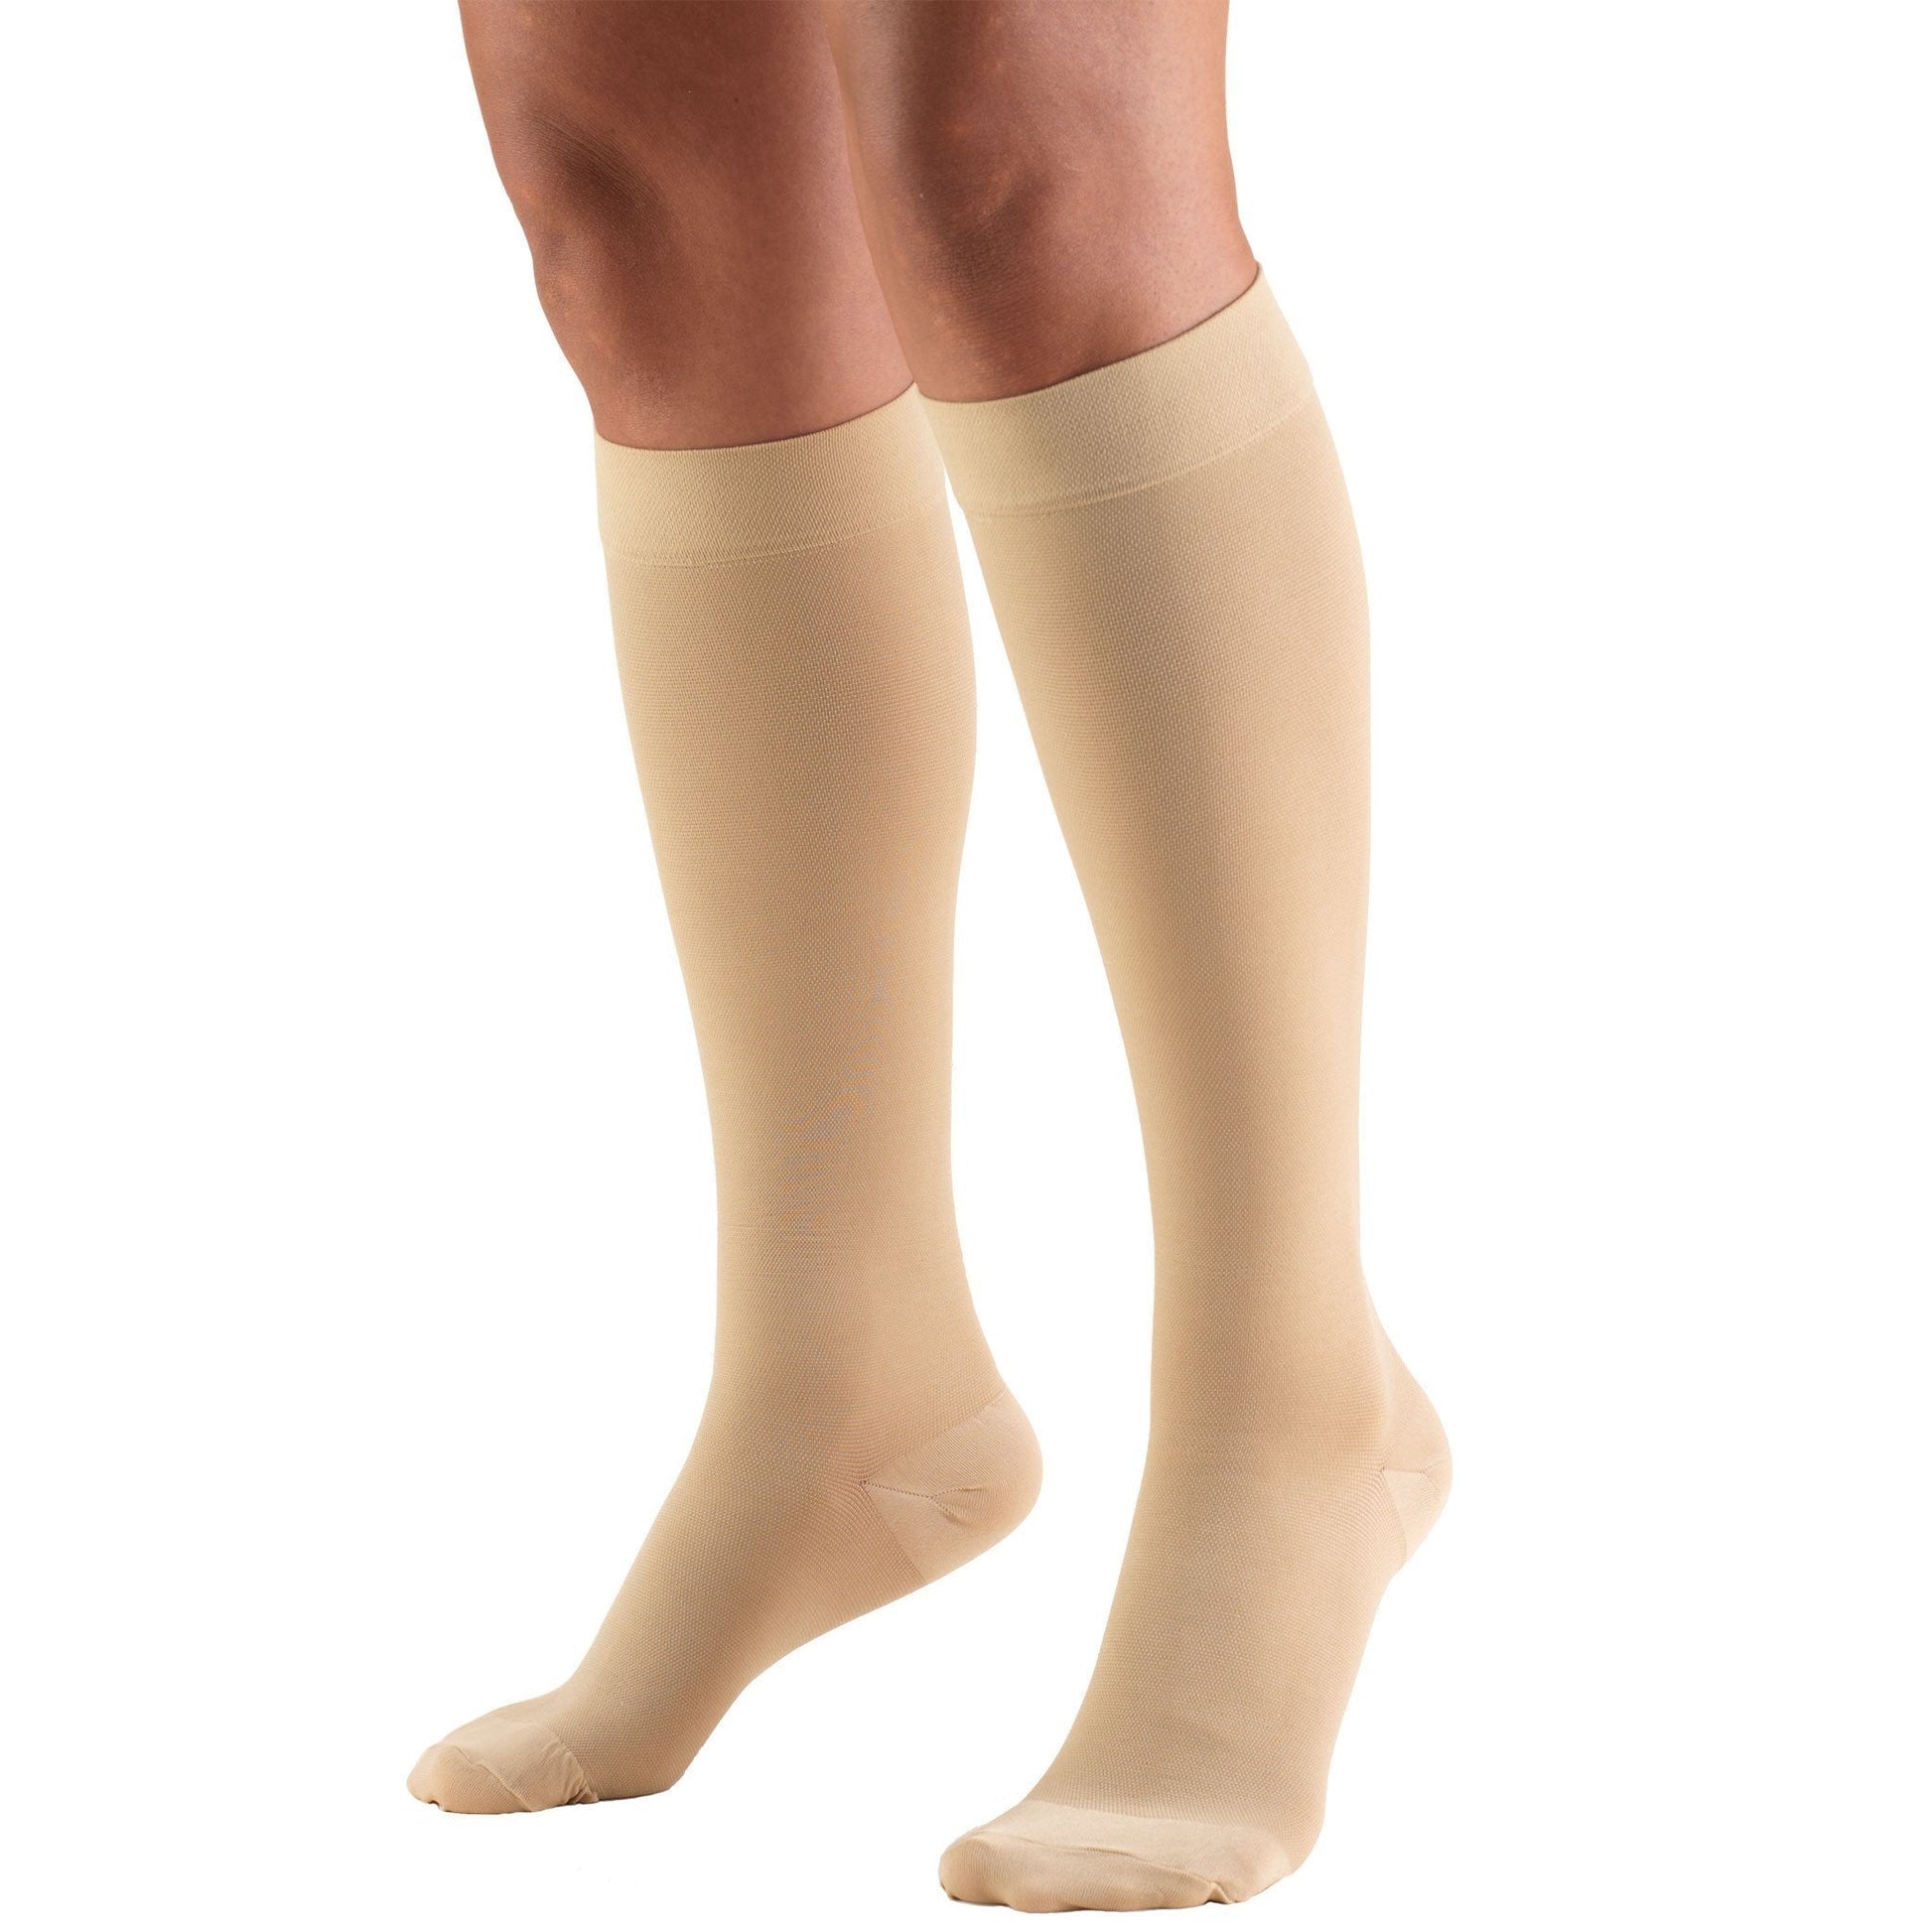 JOBST Relief - Unisex Compression Stockings Chap Style 2 Legs Stockings,  Open Toe , Beige